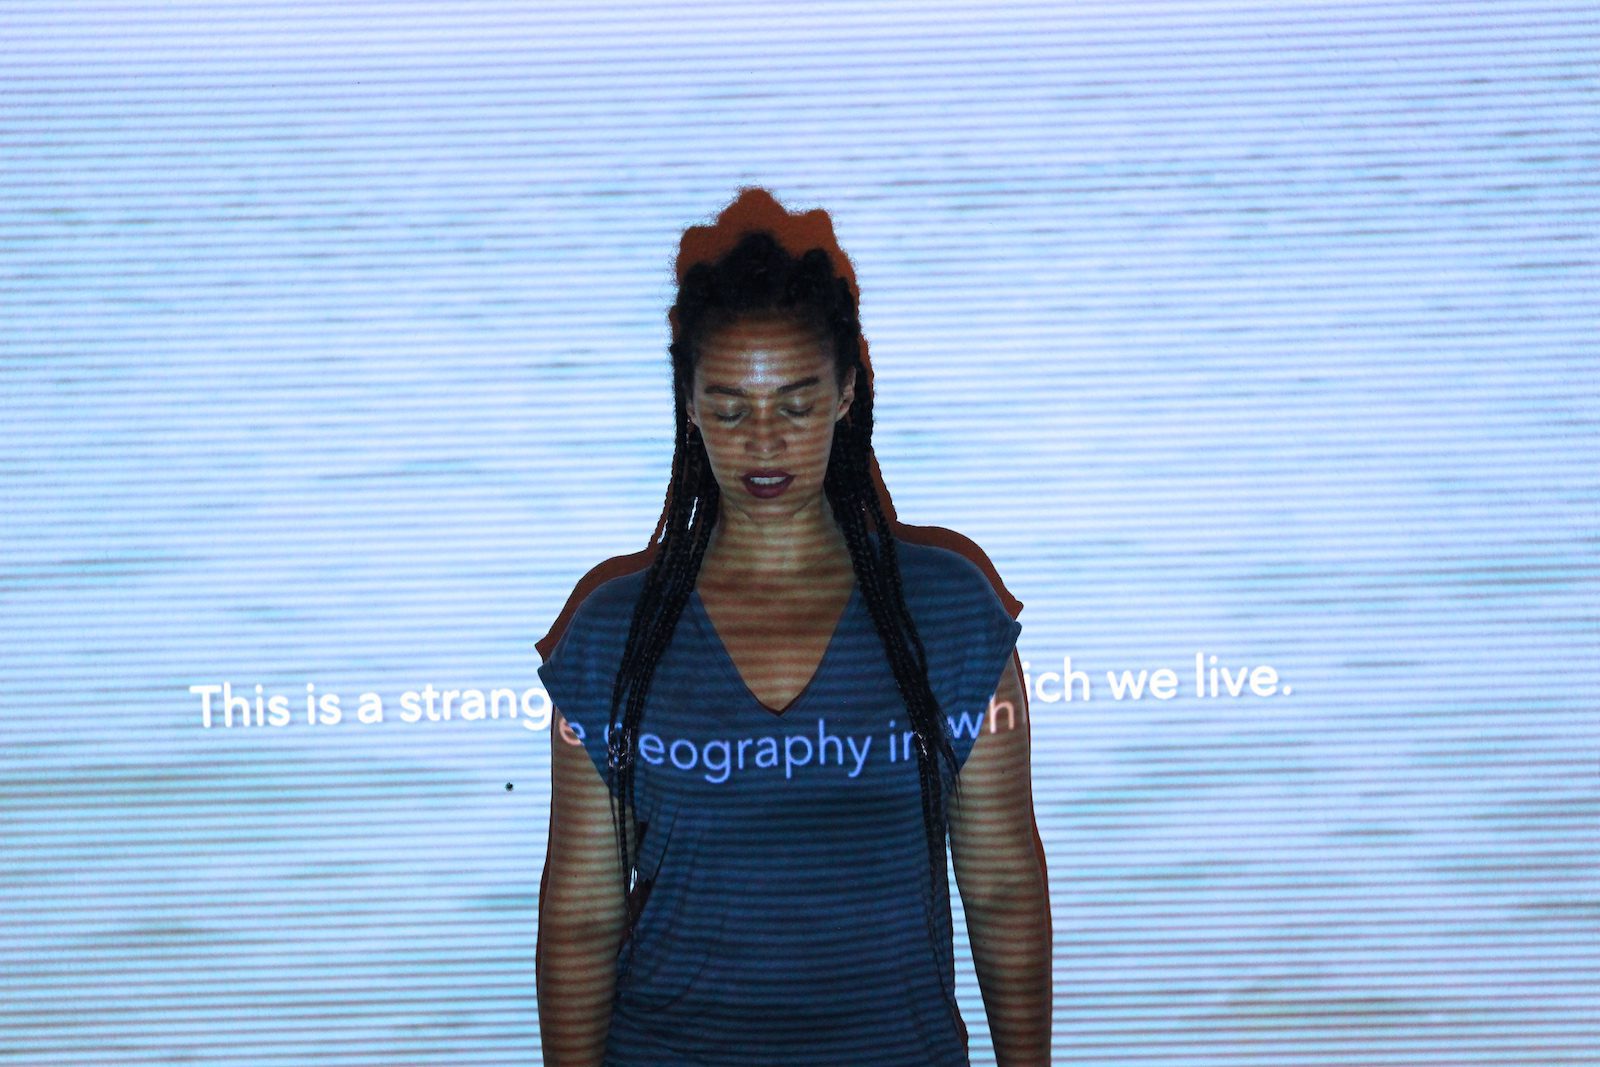 ‘ILLUSIONS’ by Grada Kilomba. Photo by Moses Leo (2016). Courtesy the artist and Goodman Gallery.